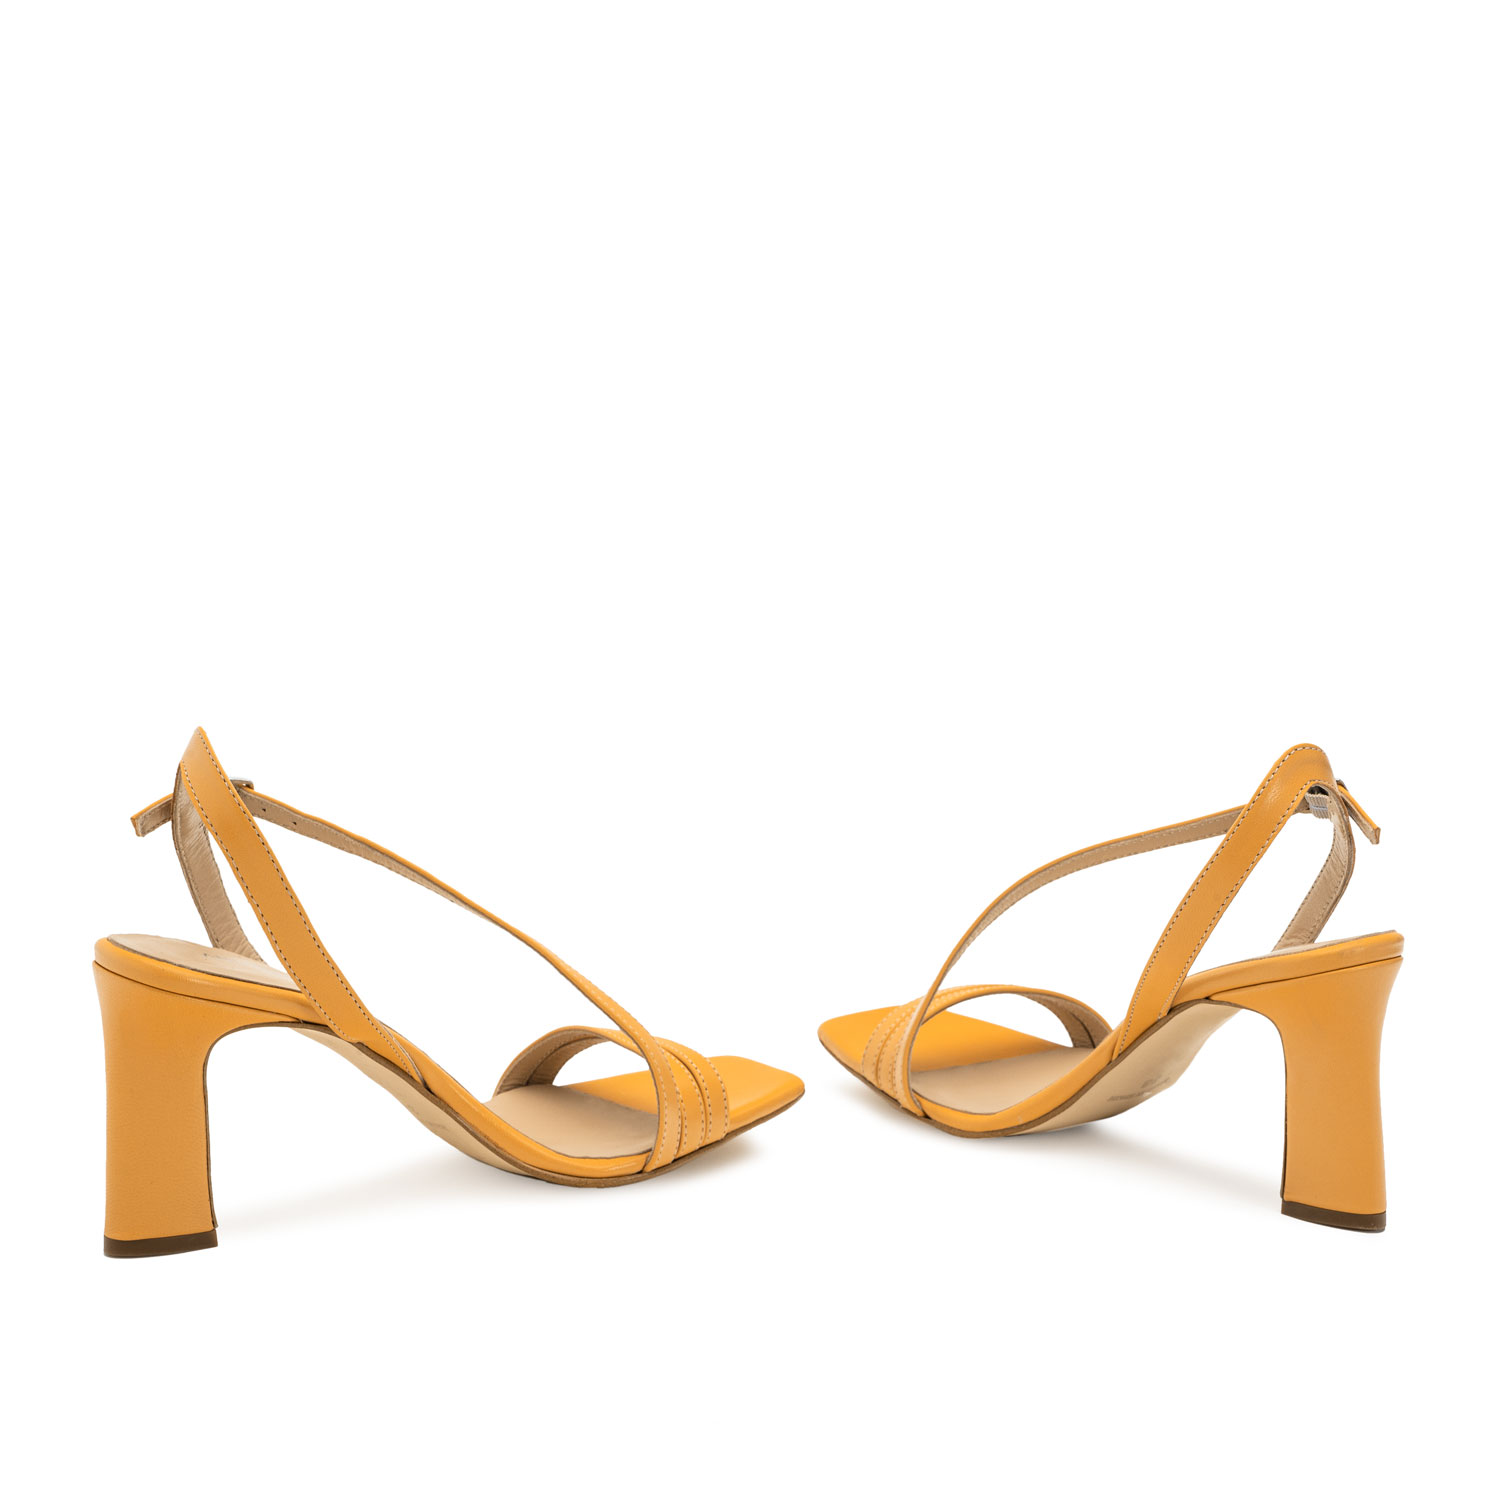 Crossover Heeled Sandals in Orange Leather 